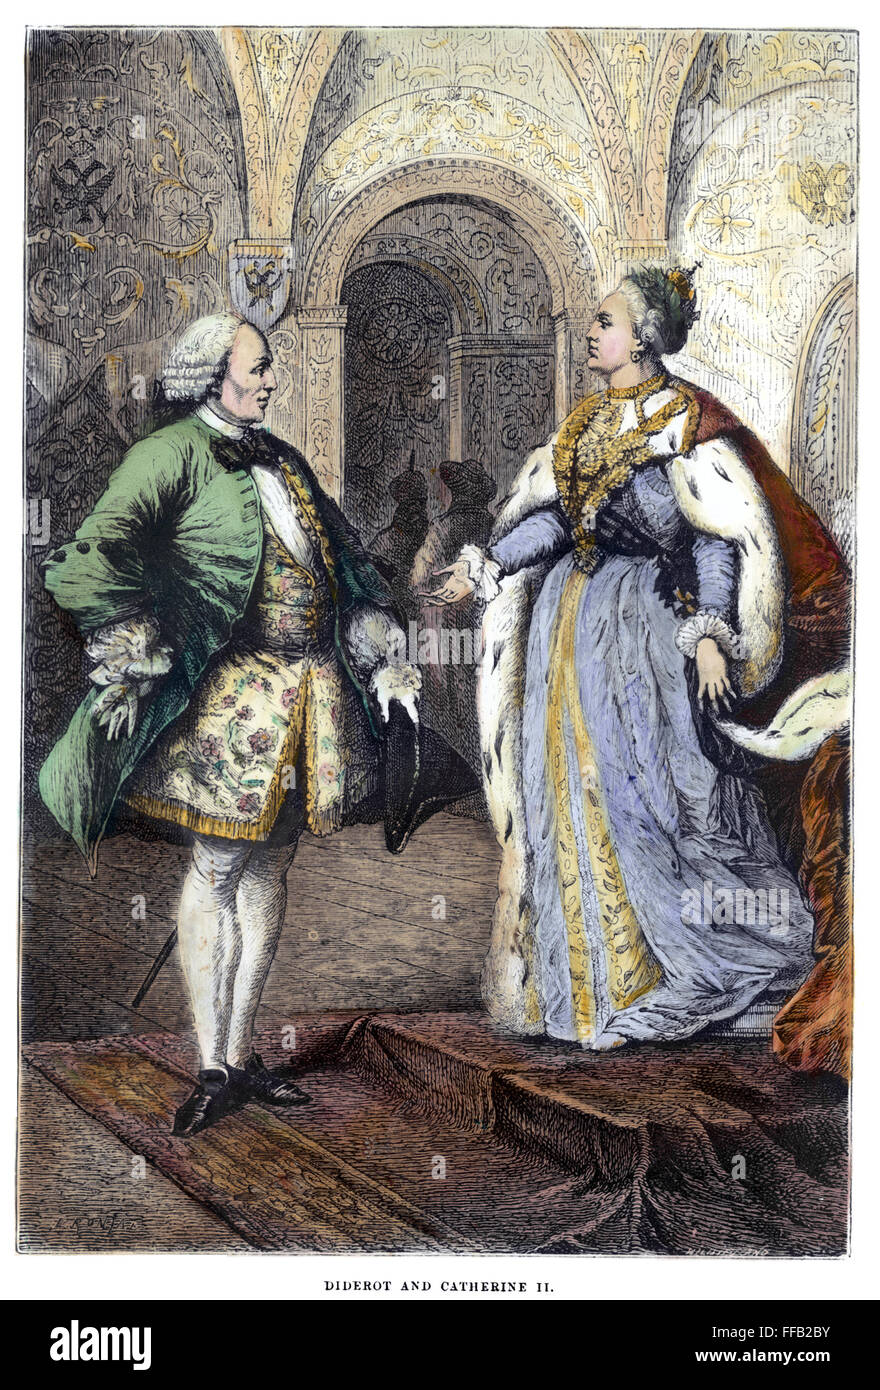 DENIS DIDEROT (1713-1784). /nFrench encyclopedist and philosopher. With Catherine the Great at St. Petersburg in 1773-74. Colored engraving, 19th century. Stock Photo